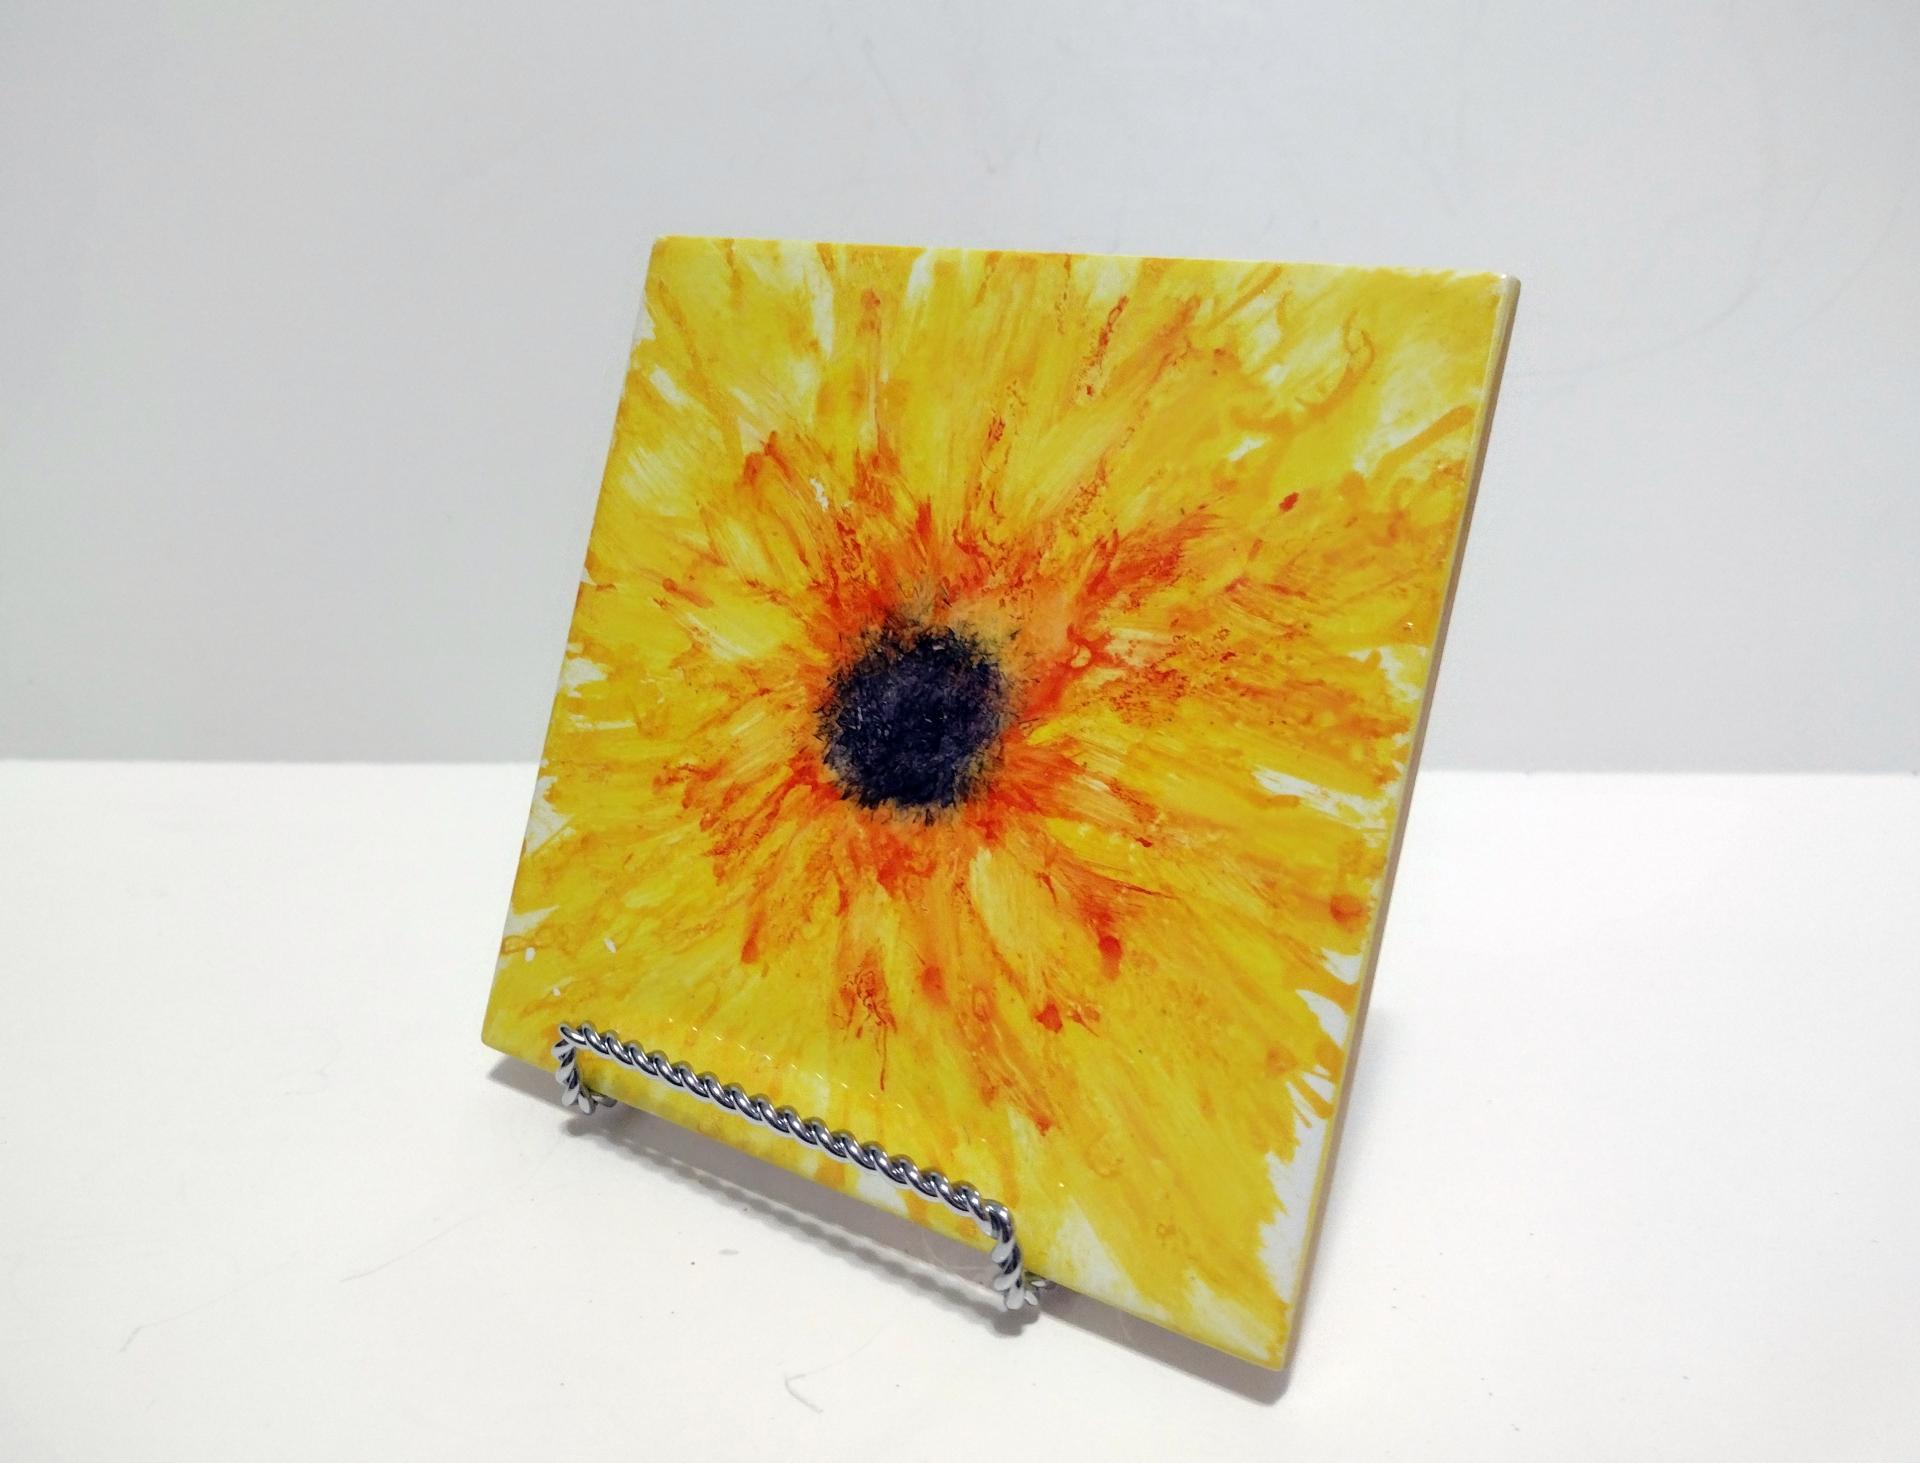 Alcohol Ink Ceramic Tile Trivet, 6" x 6", Orange and Yellow Sunflower Painting